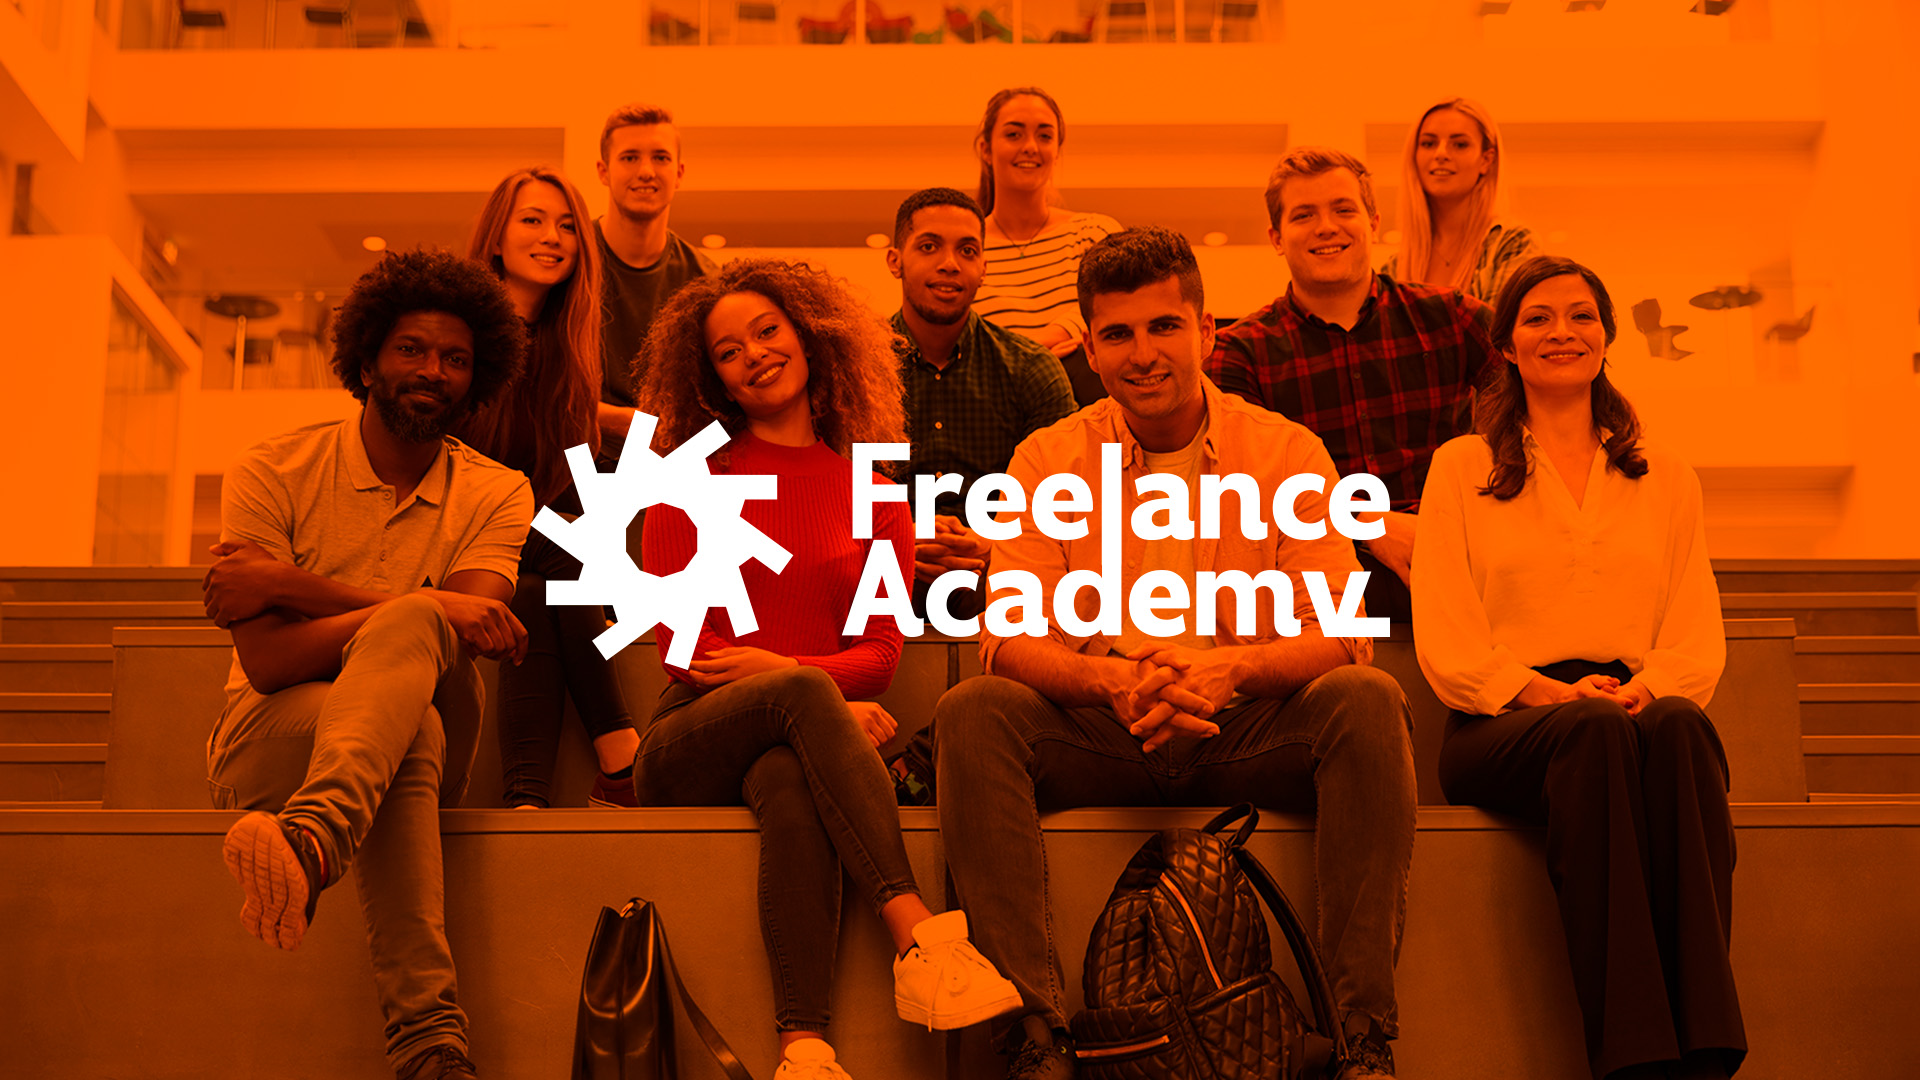 Visual Identity for Freelance Academy Design by Anes Essaoud